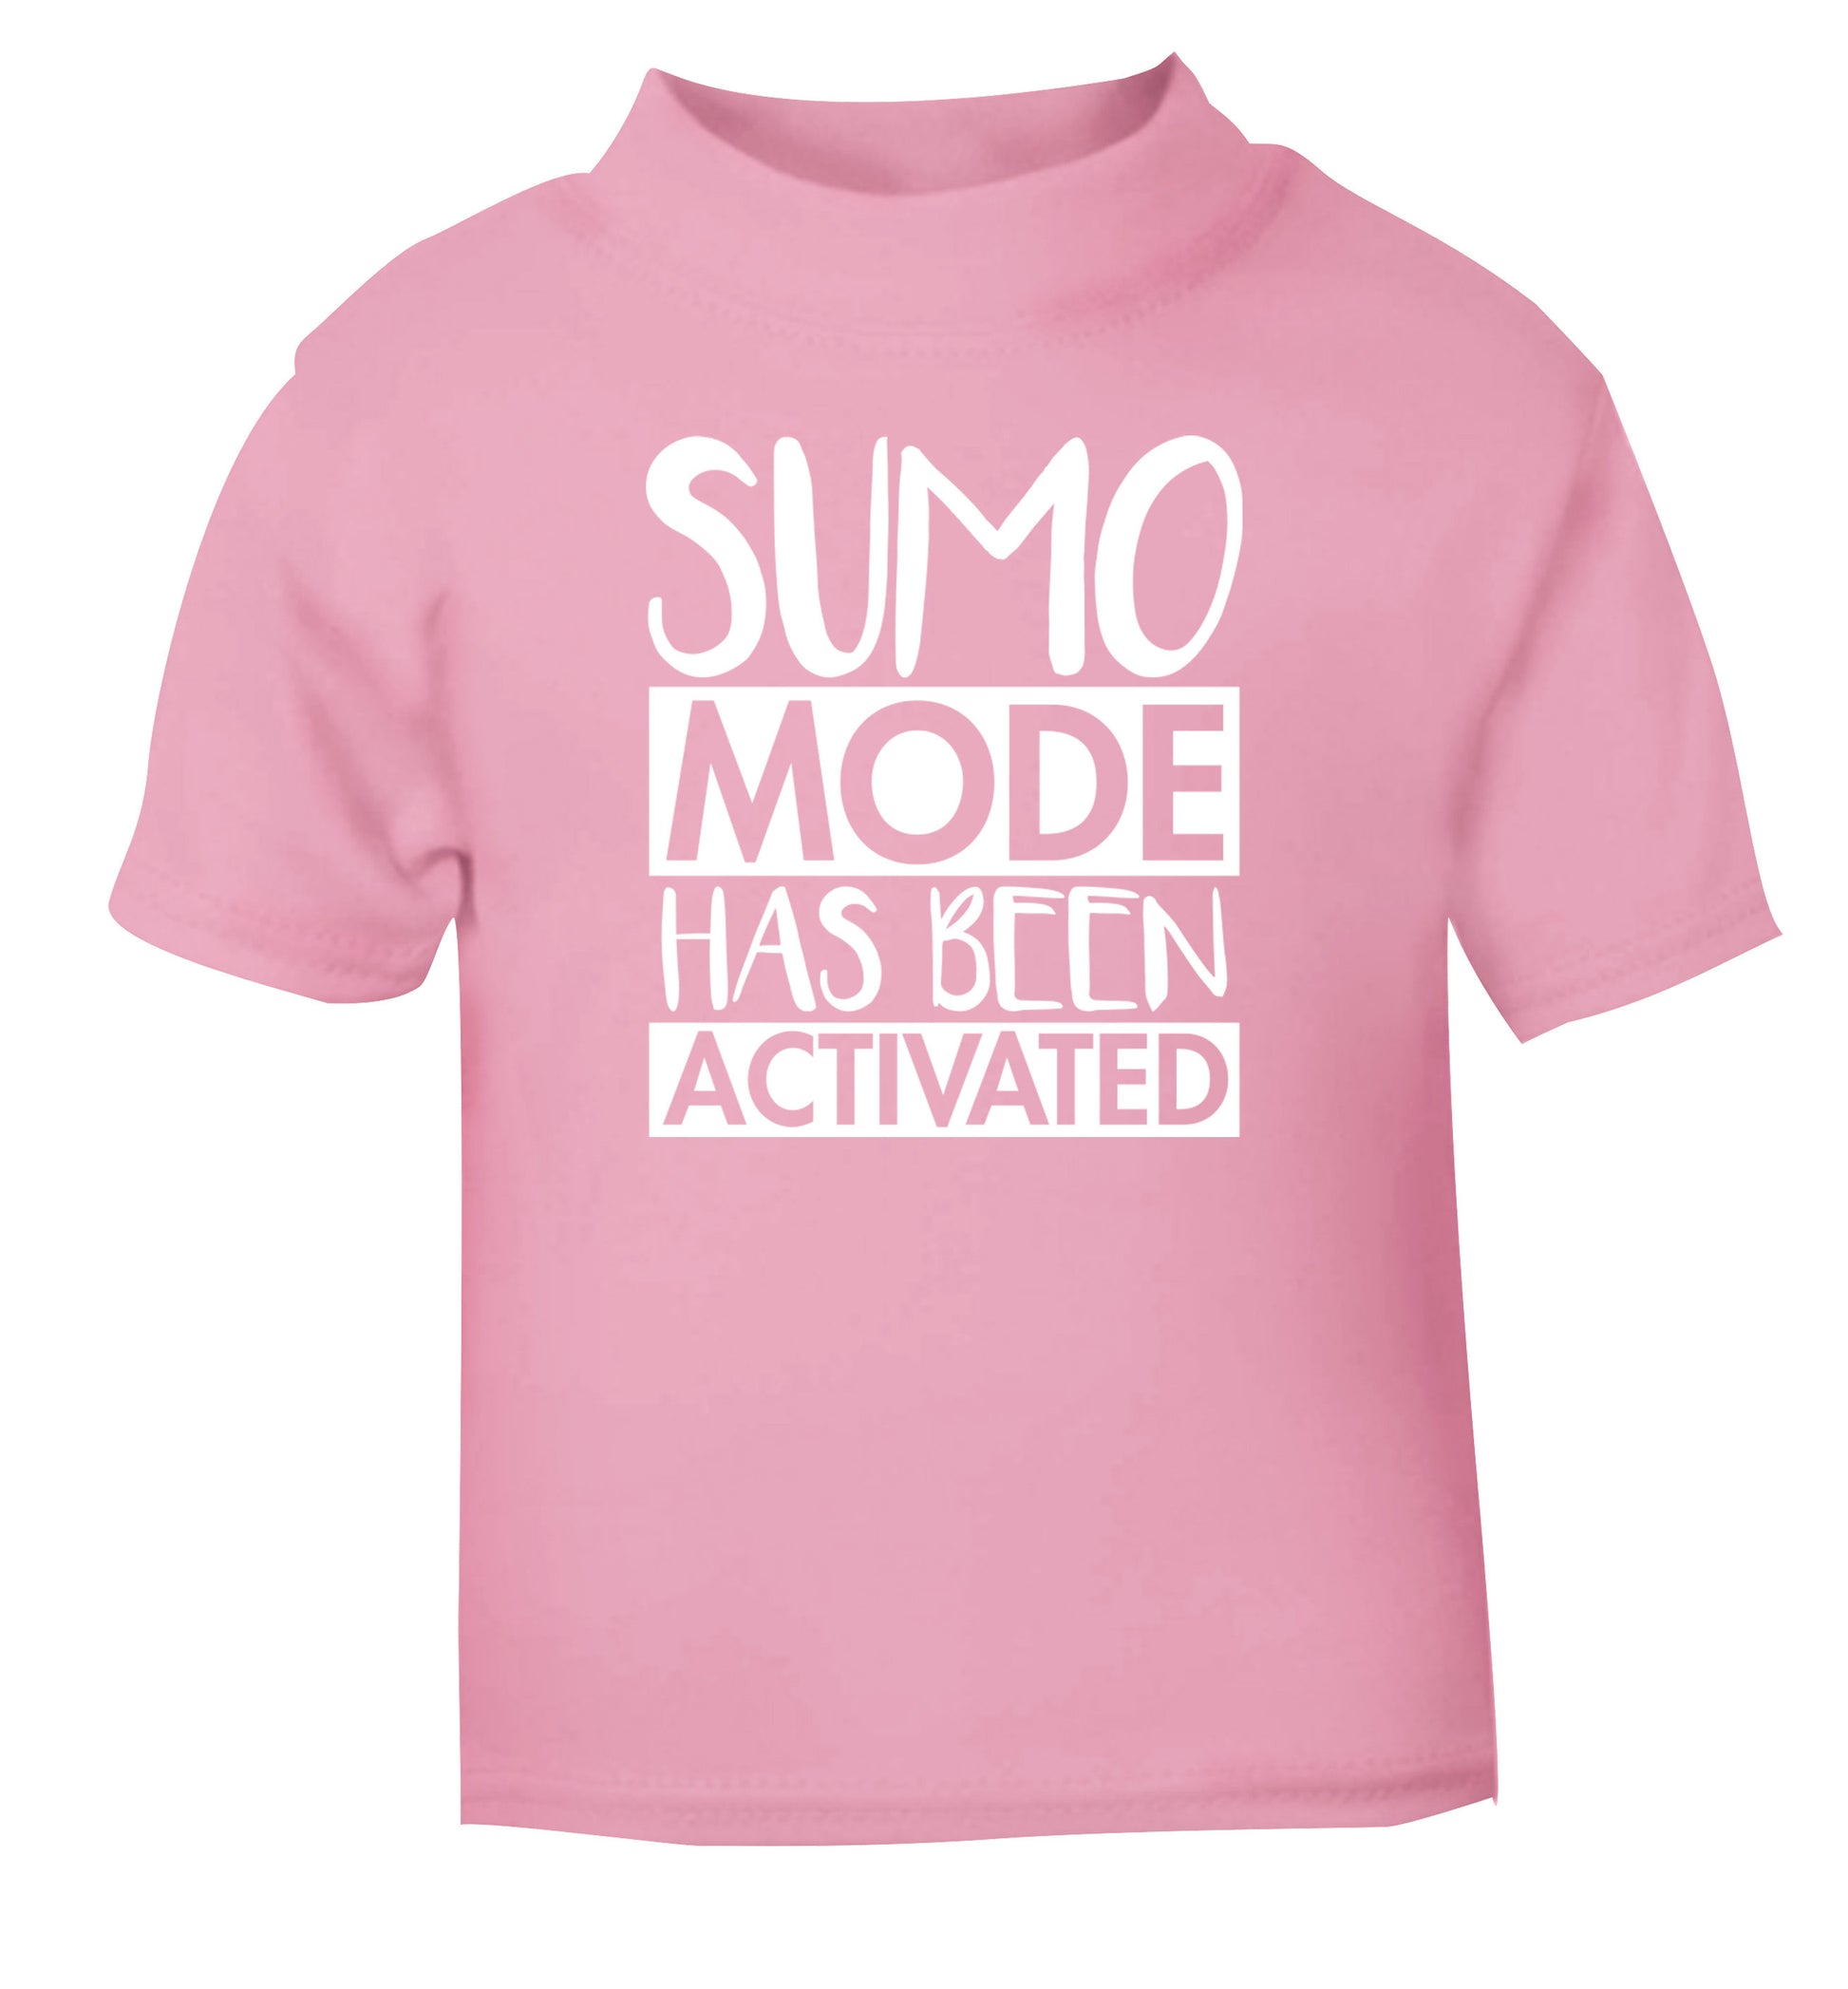 Sumo mode activated light pink Baby Toddler Tshirt 2 Years